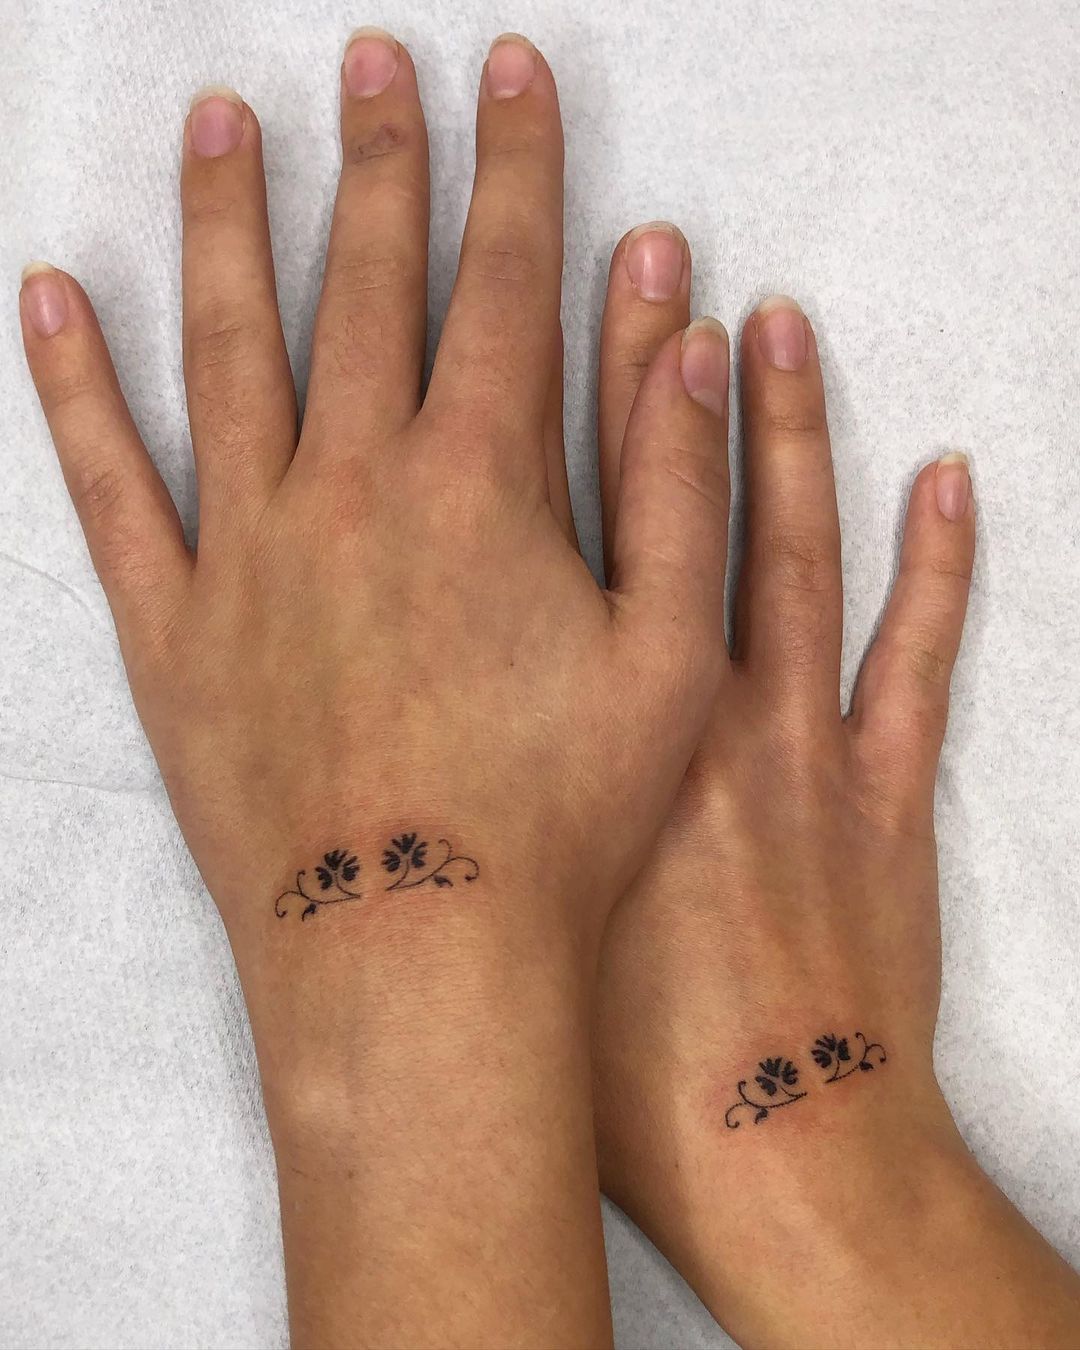 Although baby footprint tattoos are meant to memorialize the birth of your  child, some parents like to make increasingly bigger footprint... |  Instagram